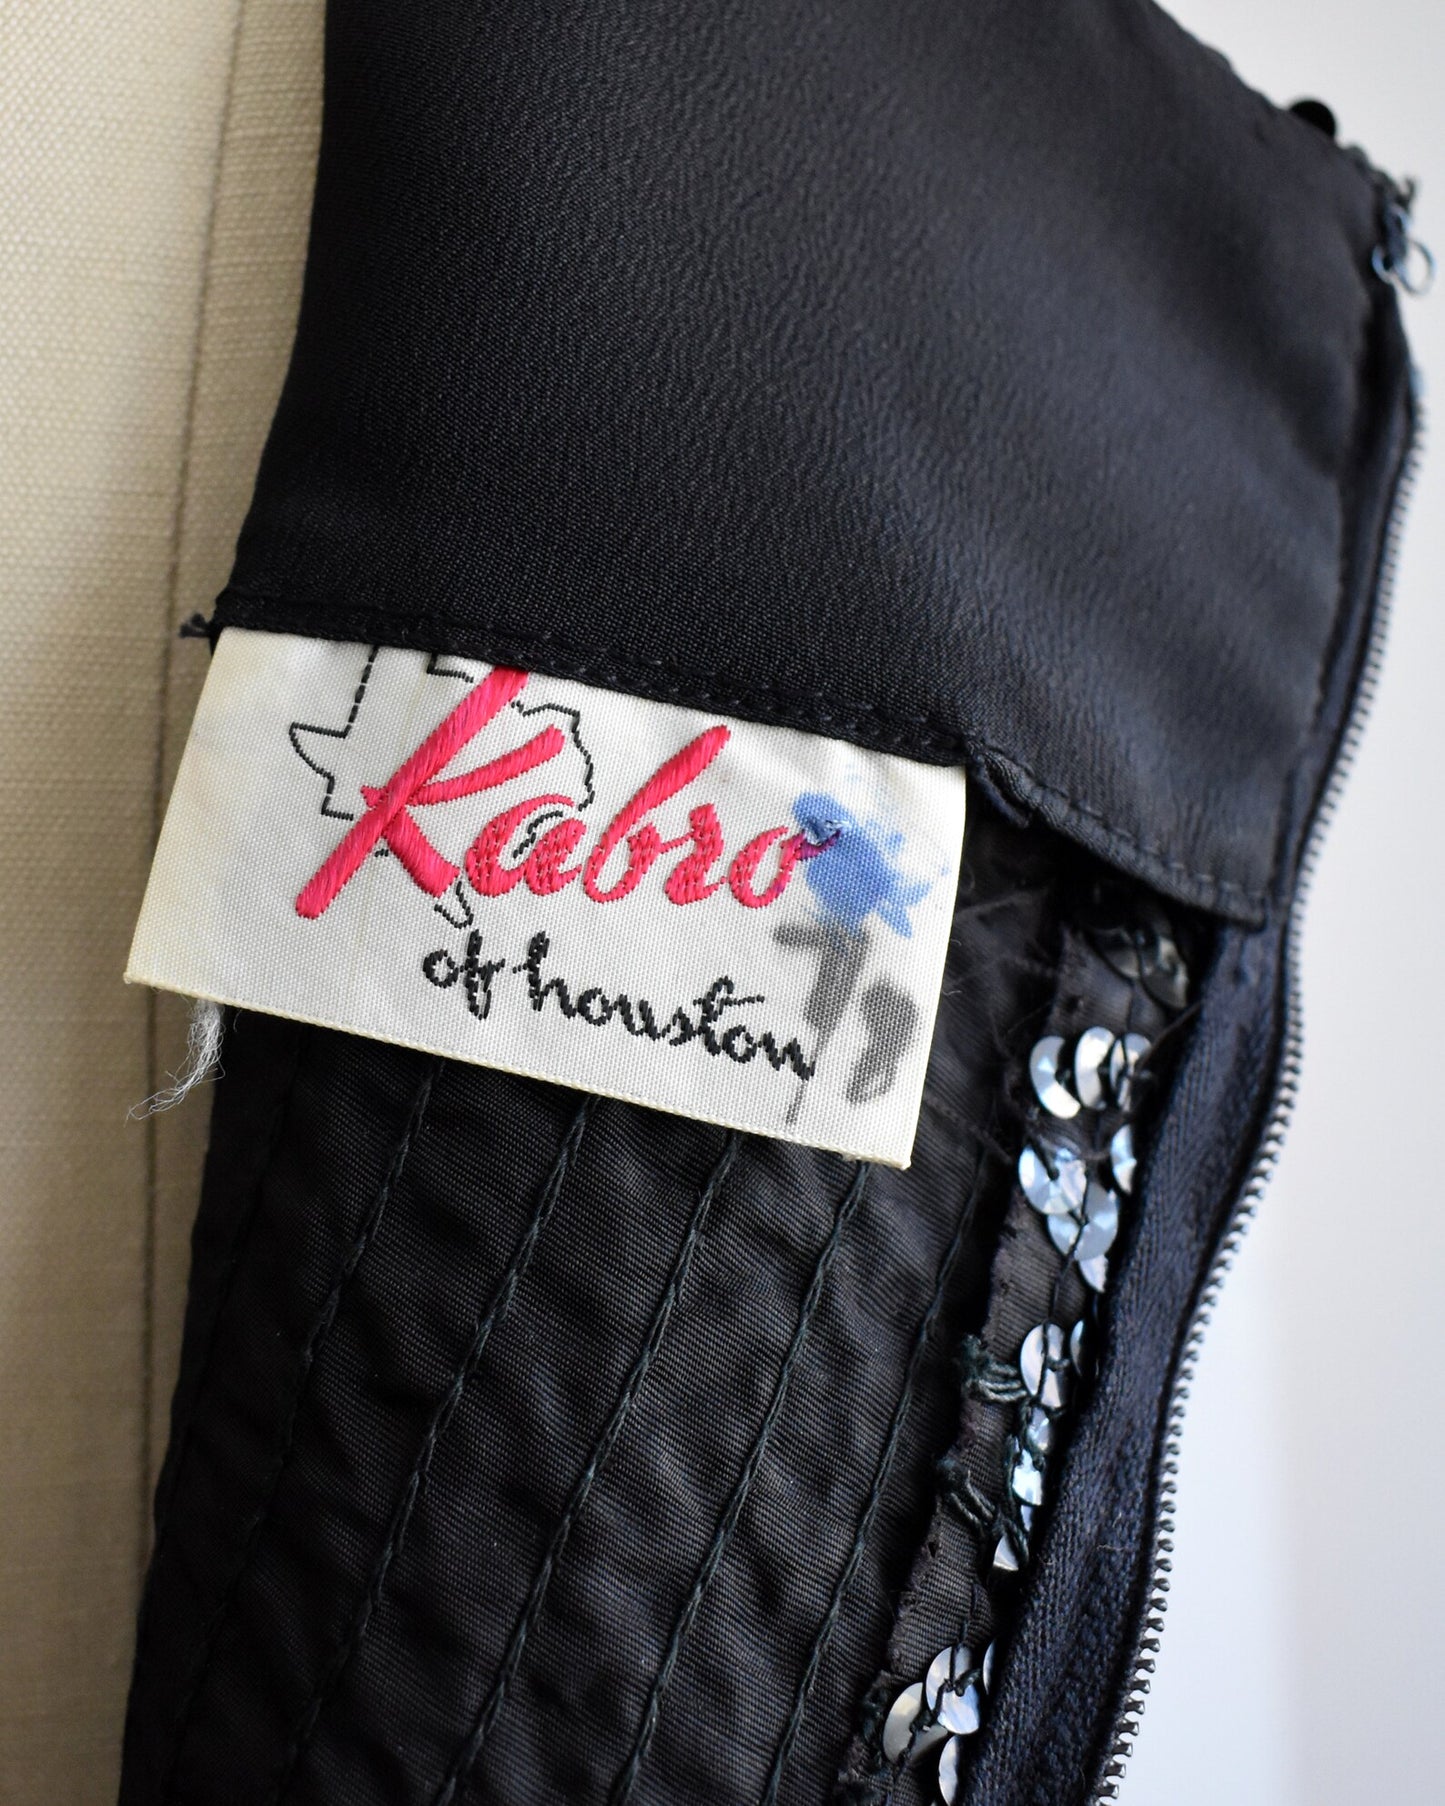 Close of the tag that says Kabro of houston